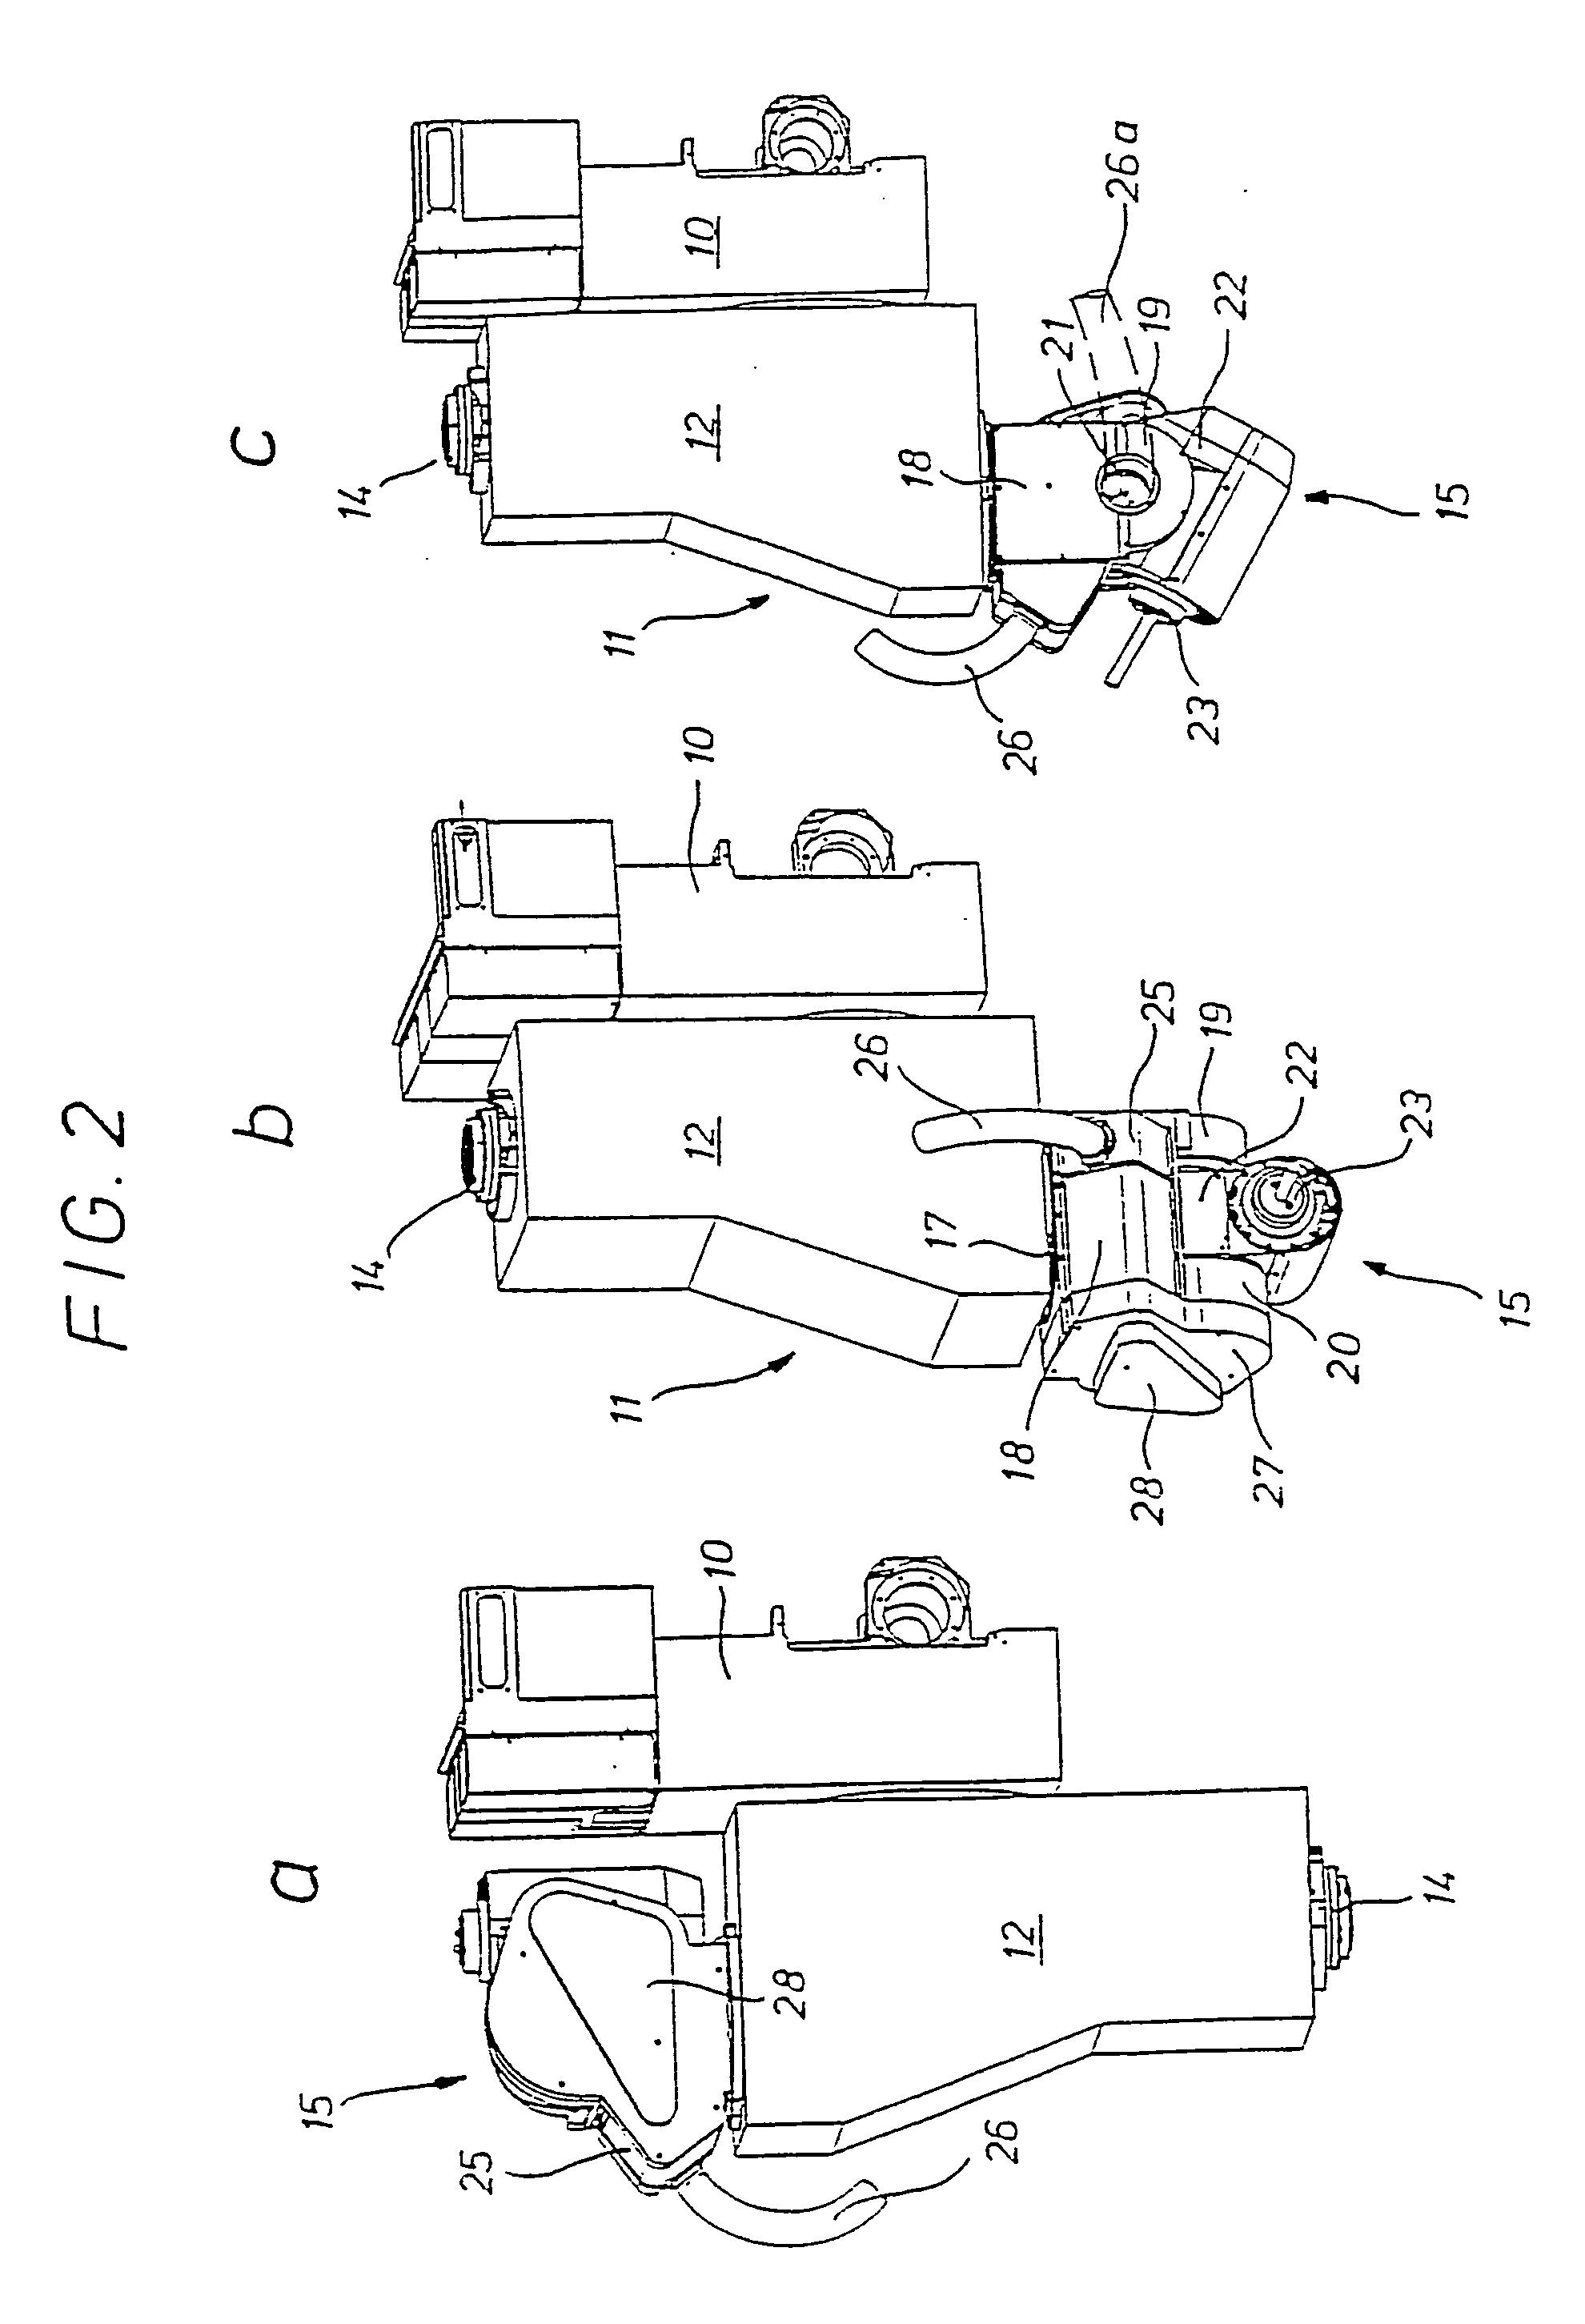 Spindle head for a universal milling machine